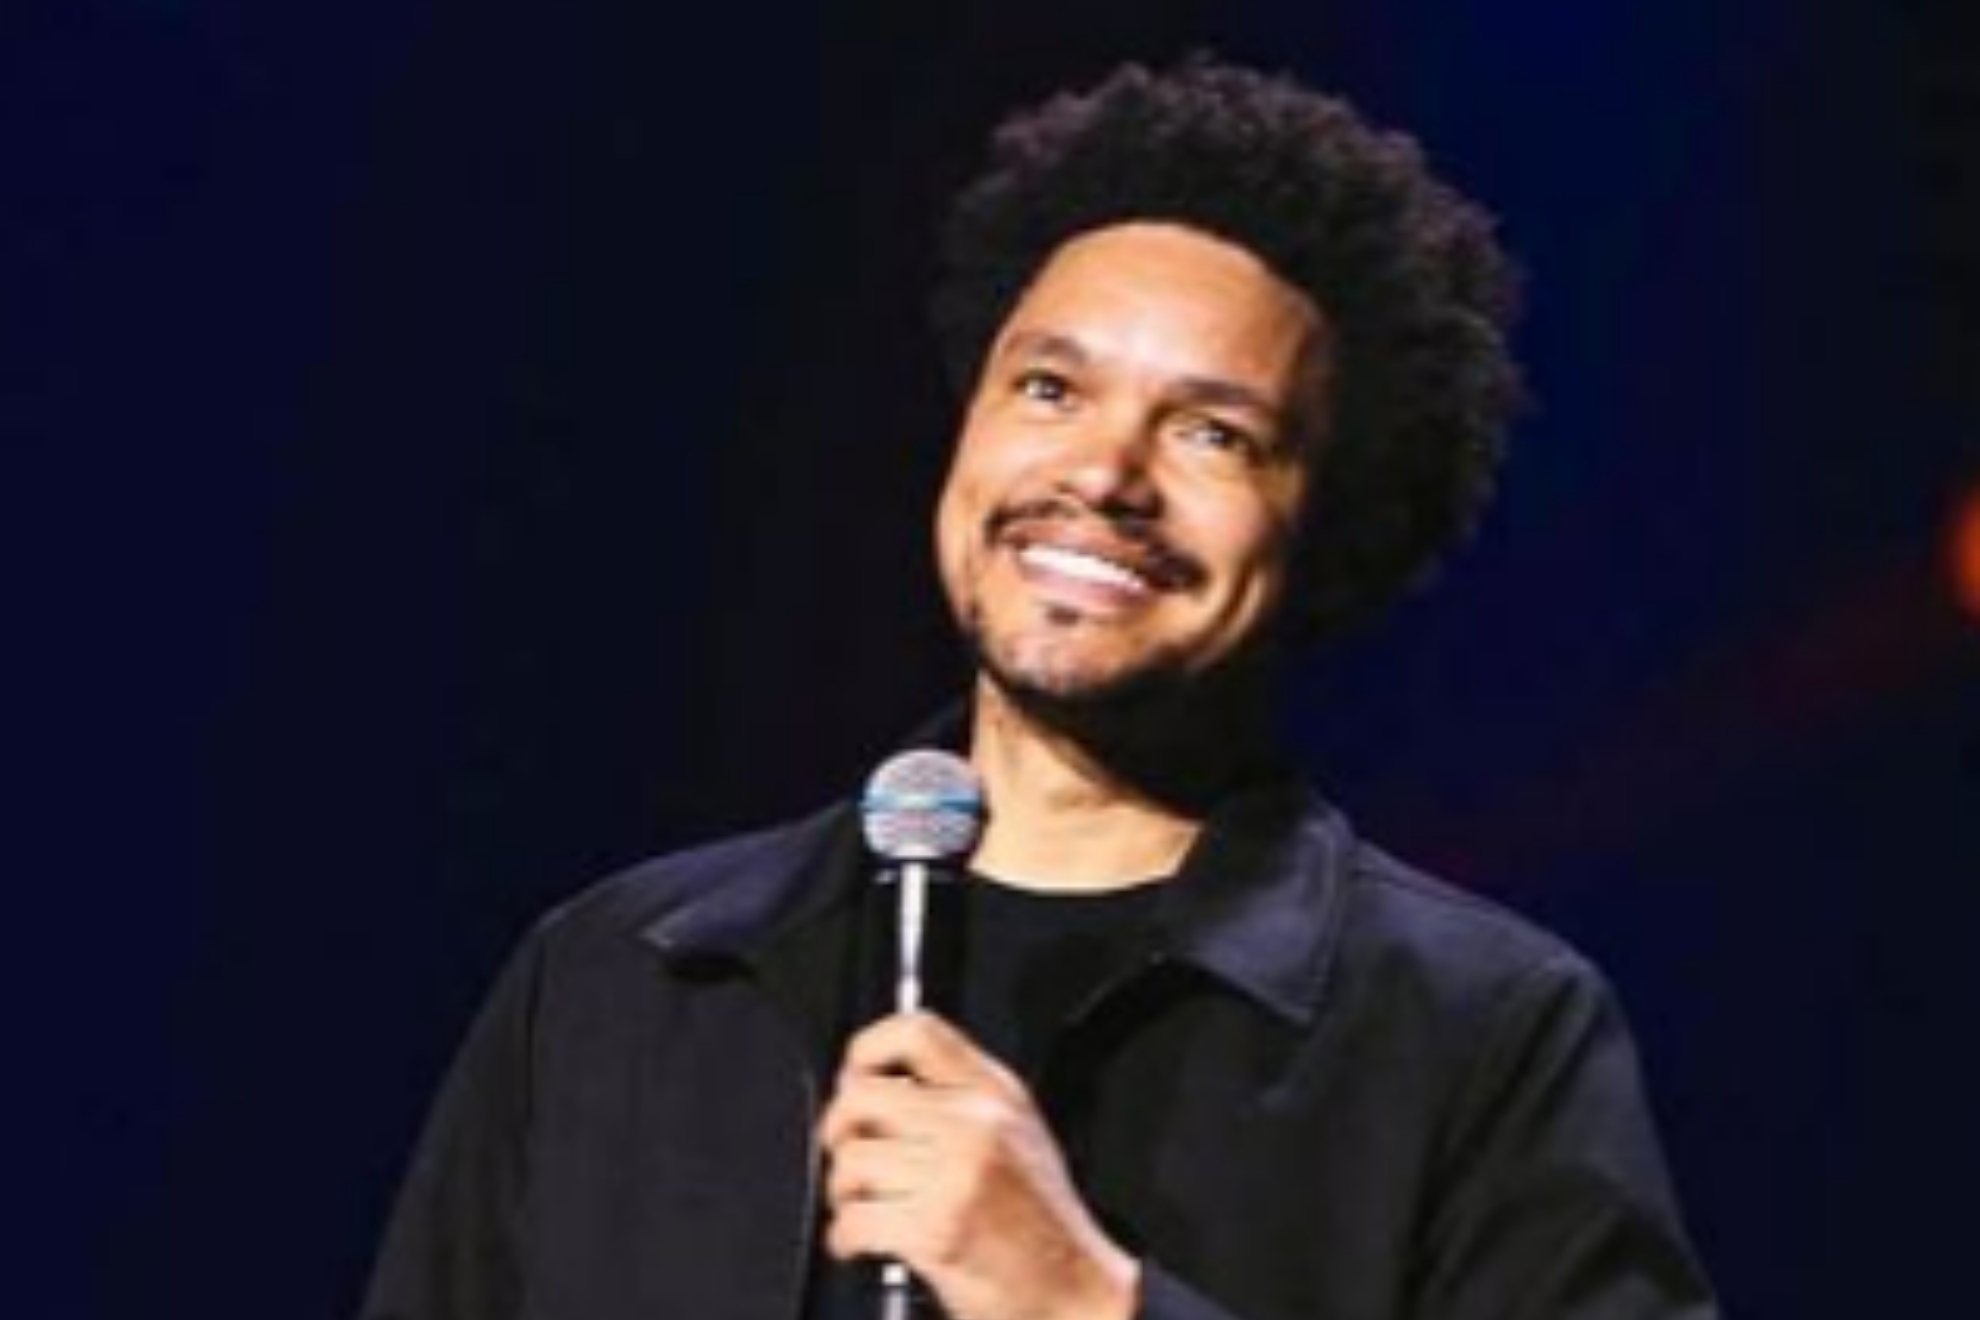 Trevor Noah reveals who's his favorite team in the World Cup while speaking about how Saudi Arabia boasted their win